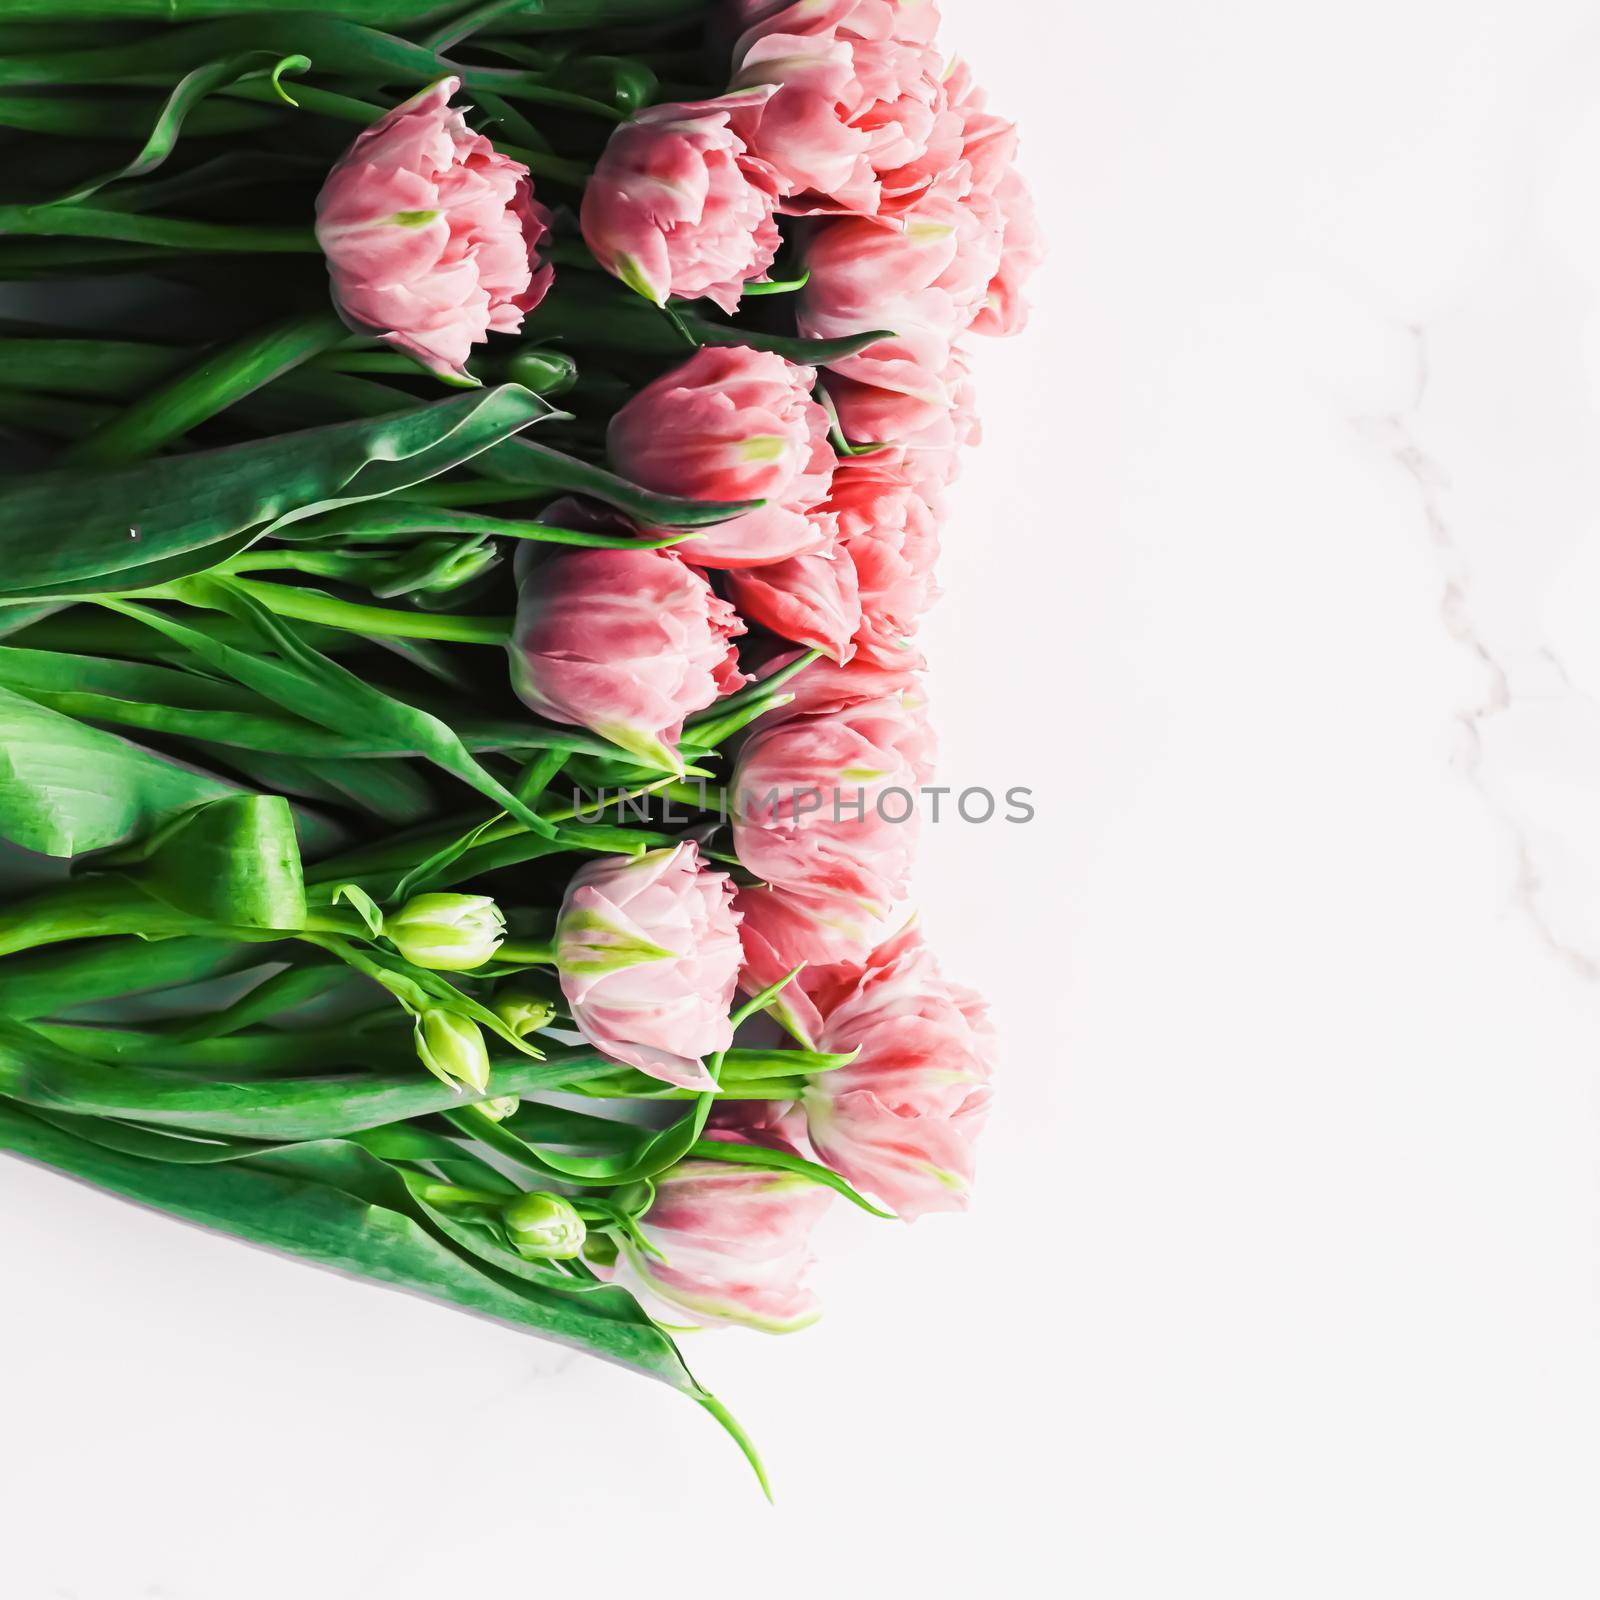 Spring flowers on marble background as holiday gift, greeting card and floral flatlay by Anneleven